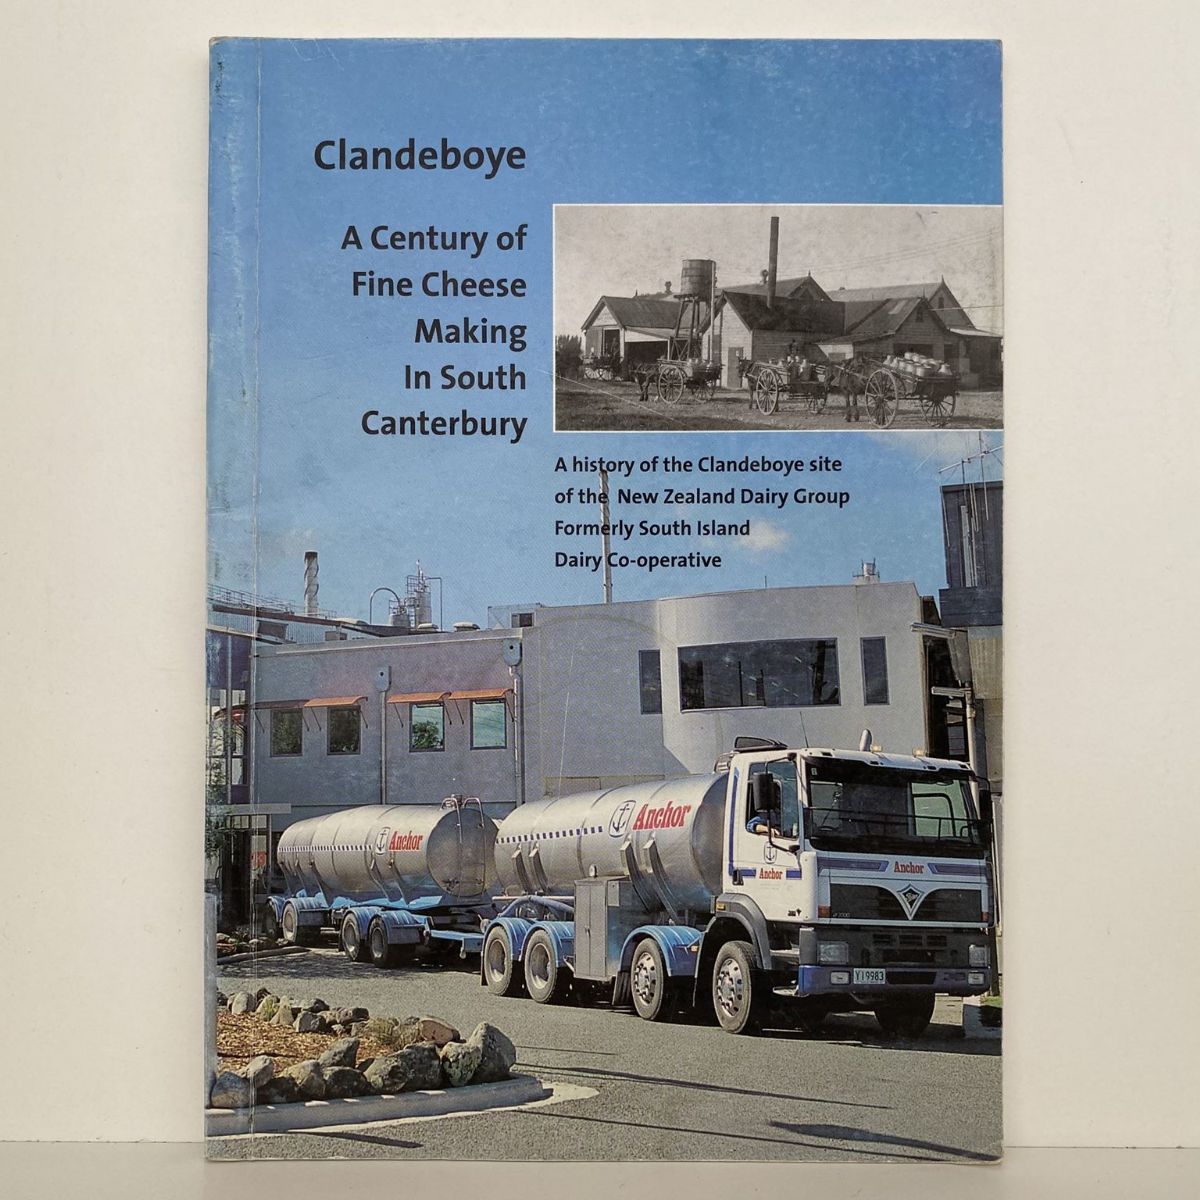 CLANDEBOYE: a Century of Fine Cheese Making in South Canterbury